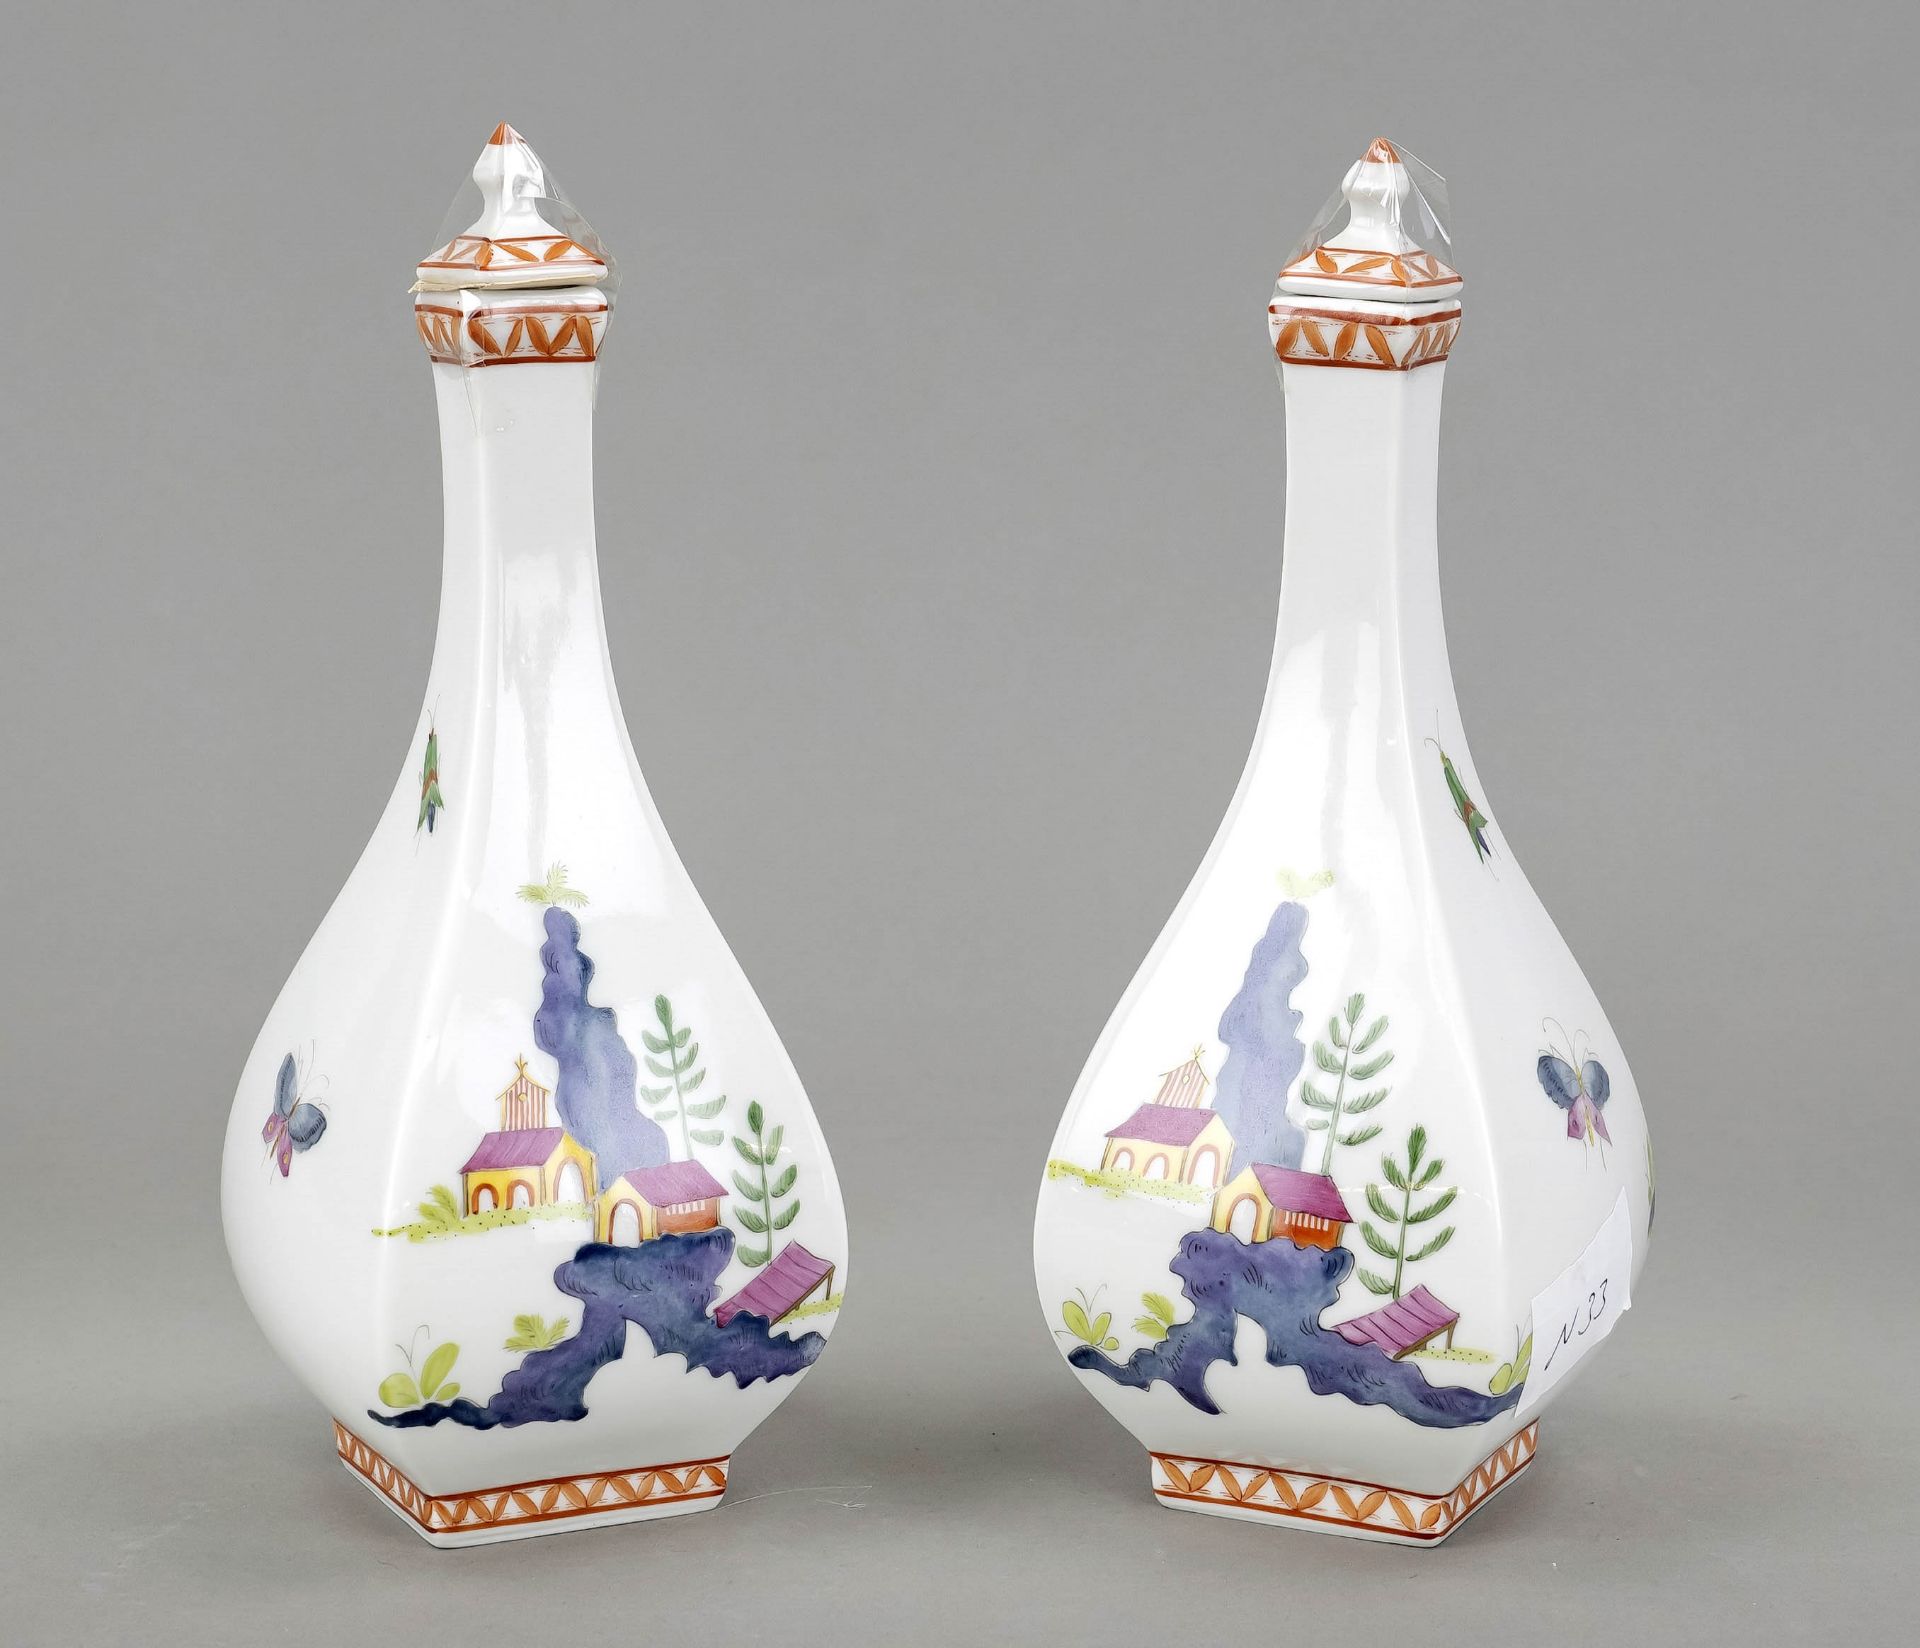 Pair of flasks with stoppers as sake bottles, Potschappel, Dresden, 20th century, polychrome